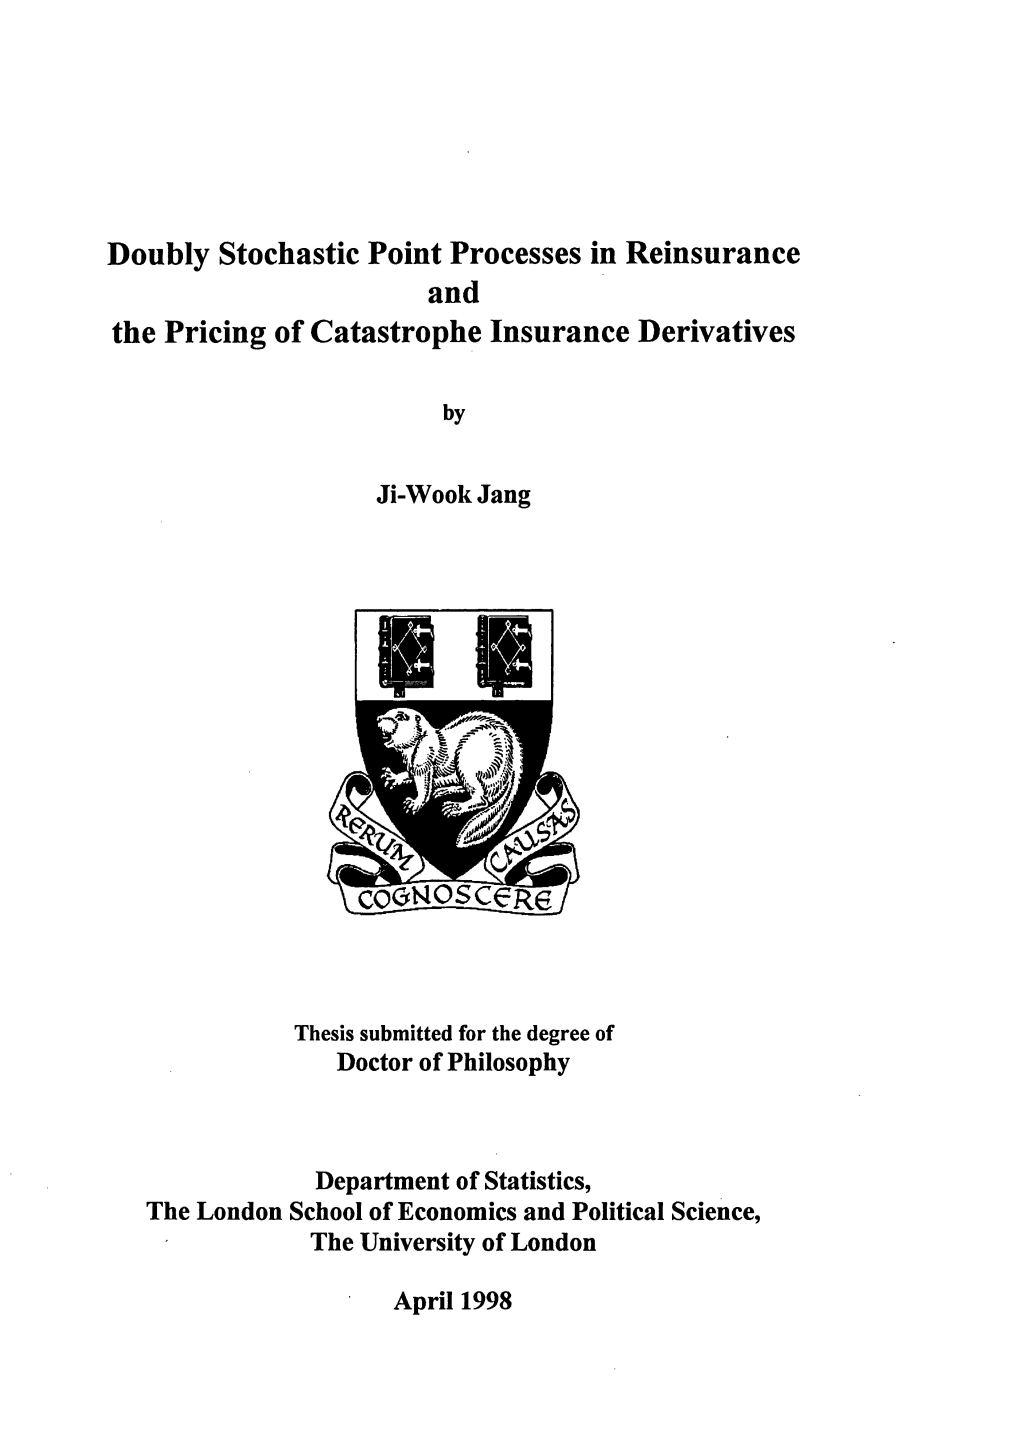 Doubly Stochastic Point Processes in Reinsurance and the Pricing of Catastrophe Insurance Derivatives